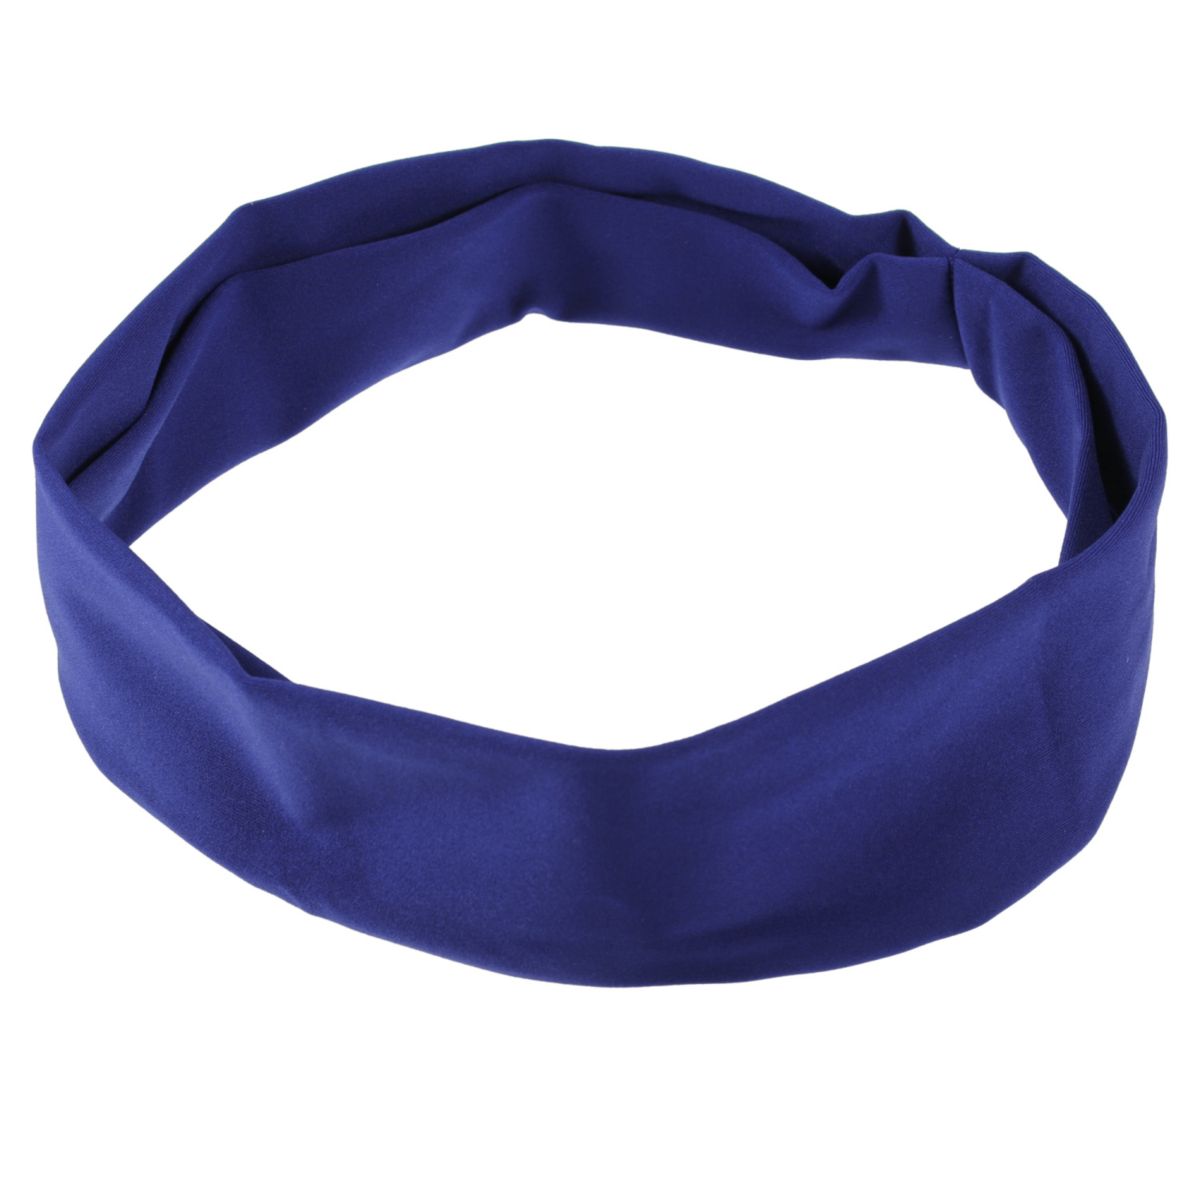 Anti-slip Sports Headbands For Men And Women Hair Bands Running Sweat Head Bands For Sports Unique Bargains